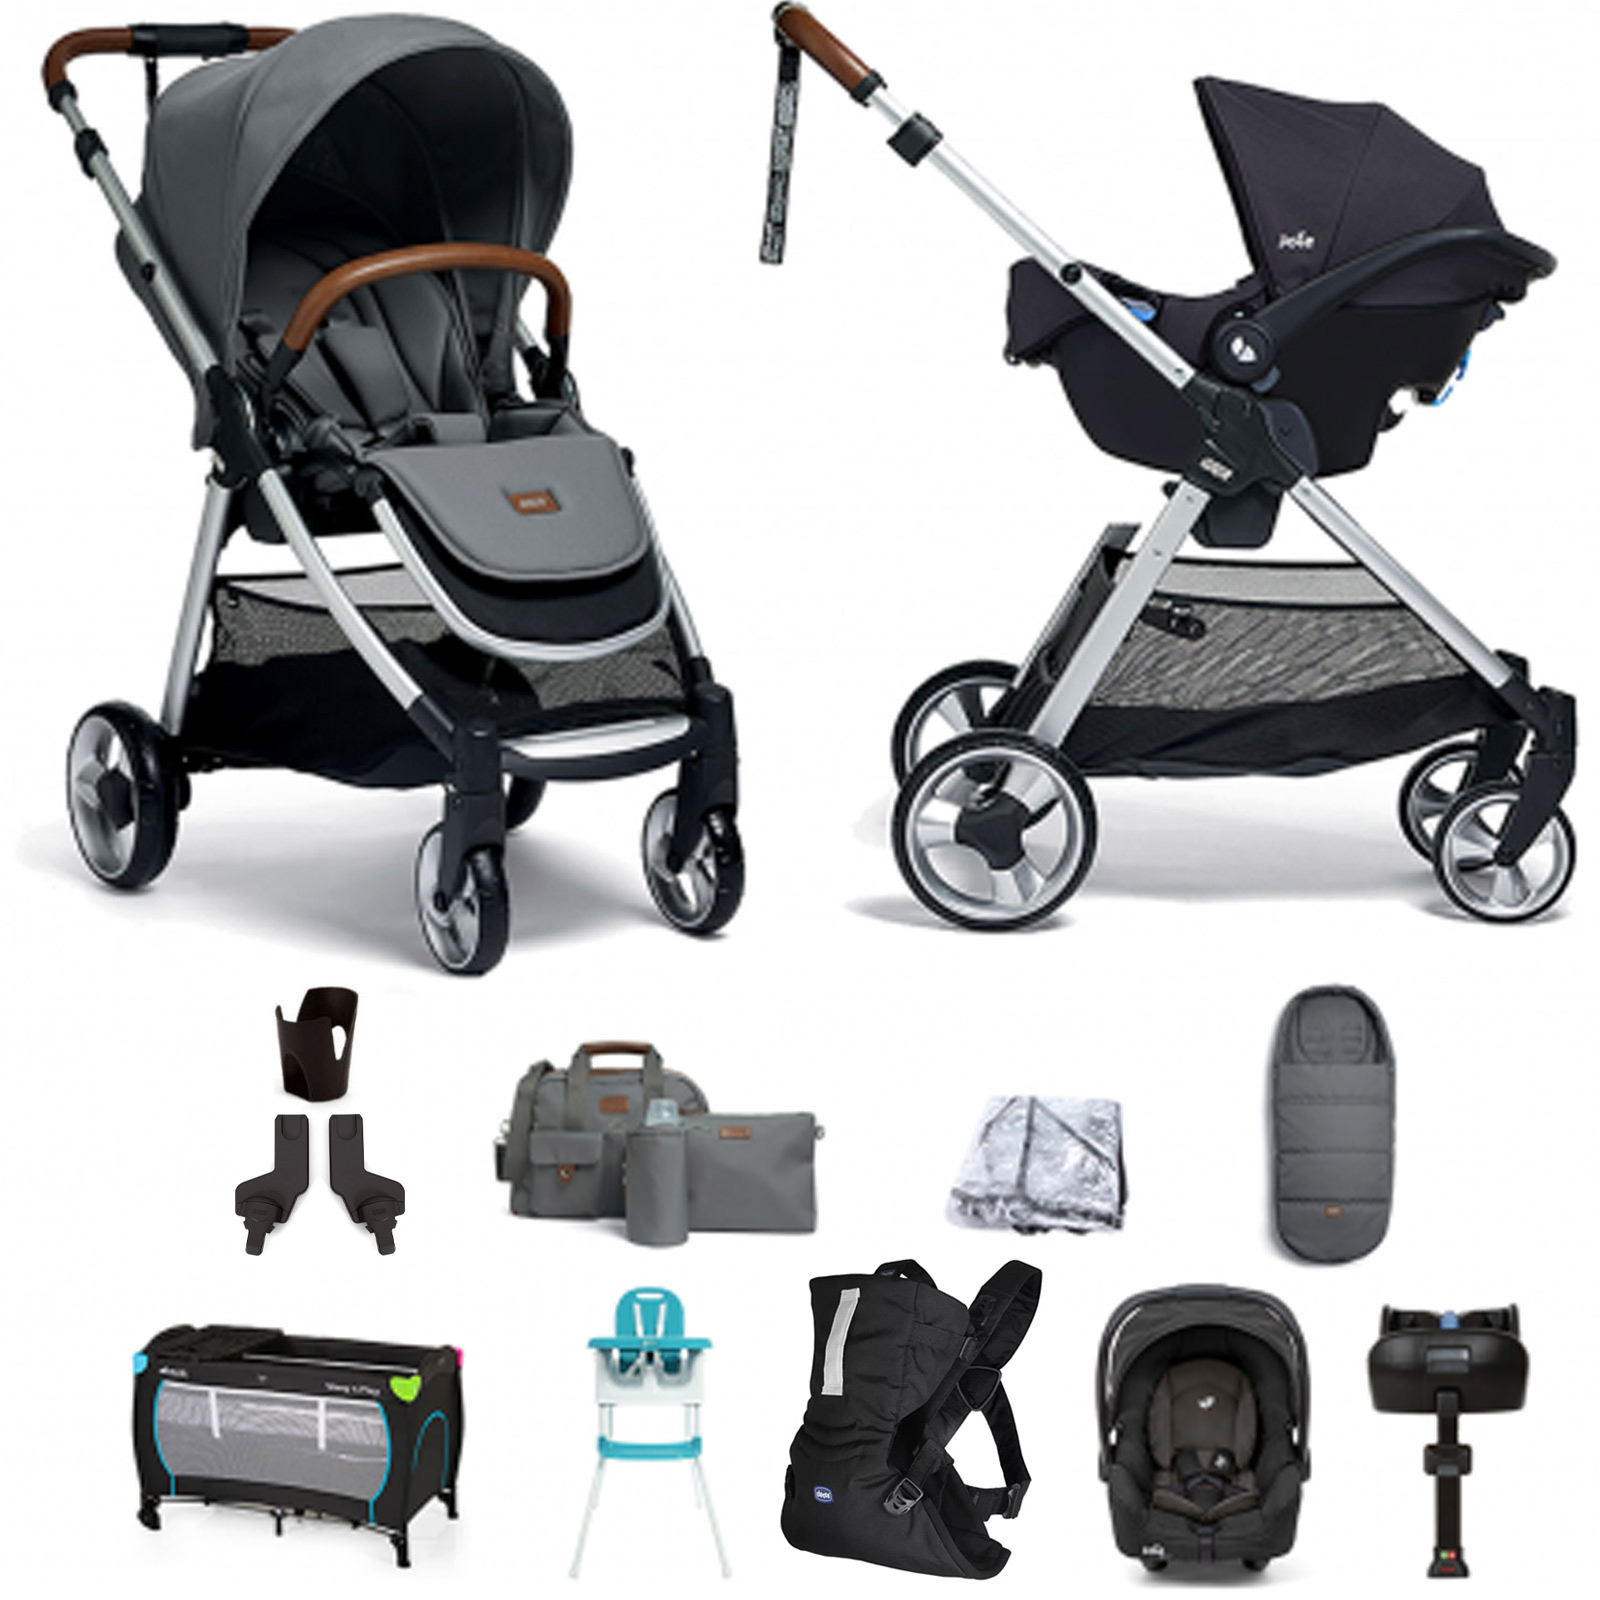 Mamas & Papas Flip XT2 11pc Essentials (Gemm Car Seat) Everything You Need Travel System Bundle with ISOFIX Base - Fossil Grey